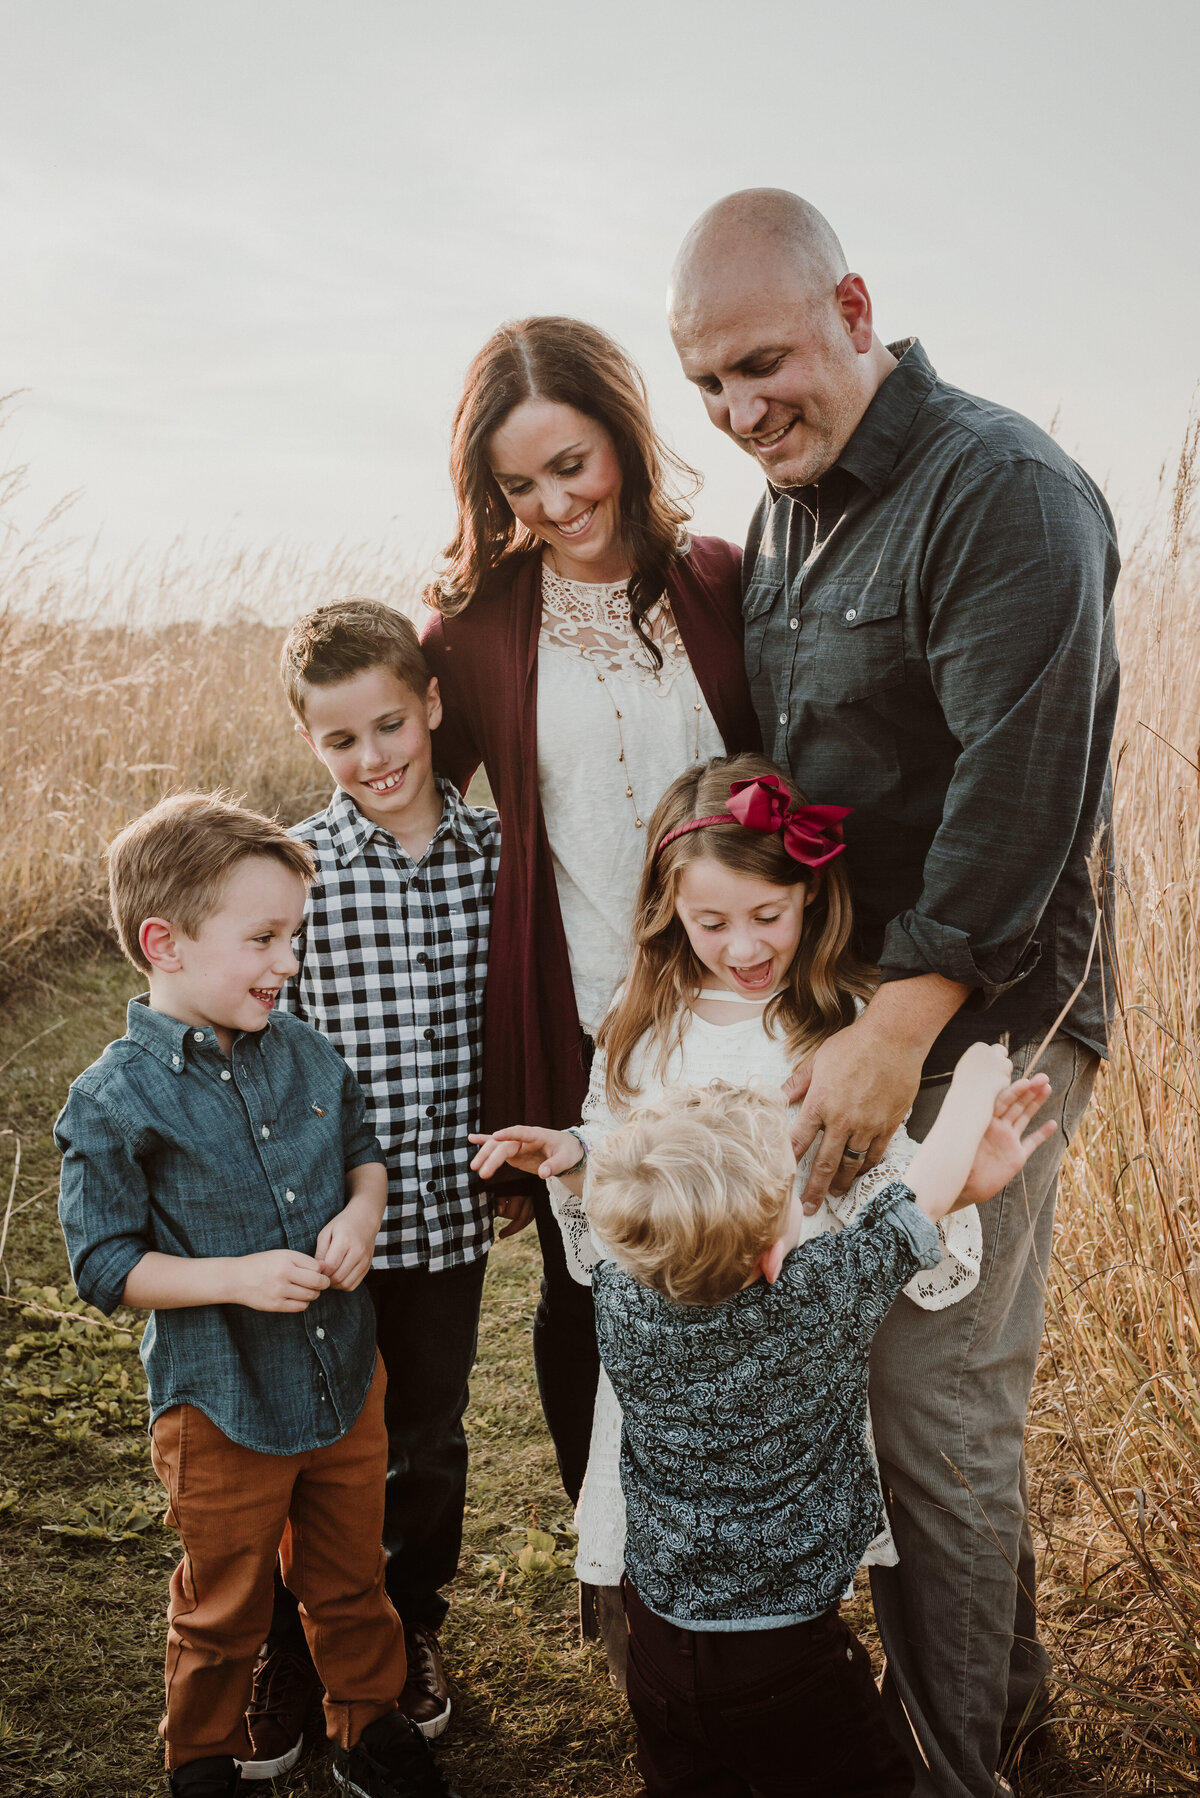 Hear meadow melodies in your family photos in St. Paul and Minneapolis. Shannon Kathleen Photography captures your moments amidst the symphony of natural beauty. Schedule your session for meadow memories